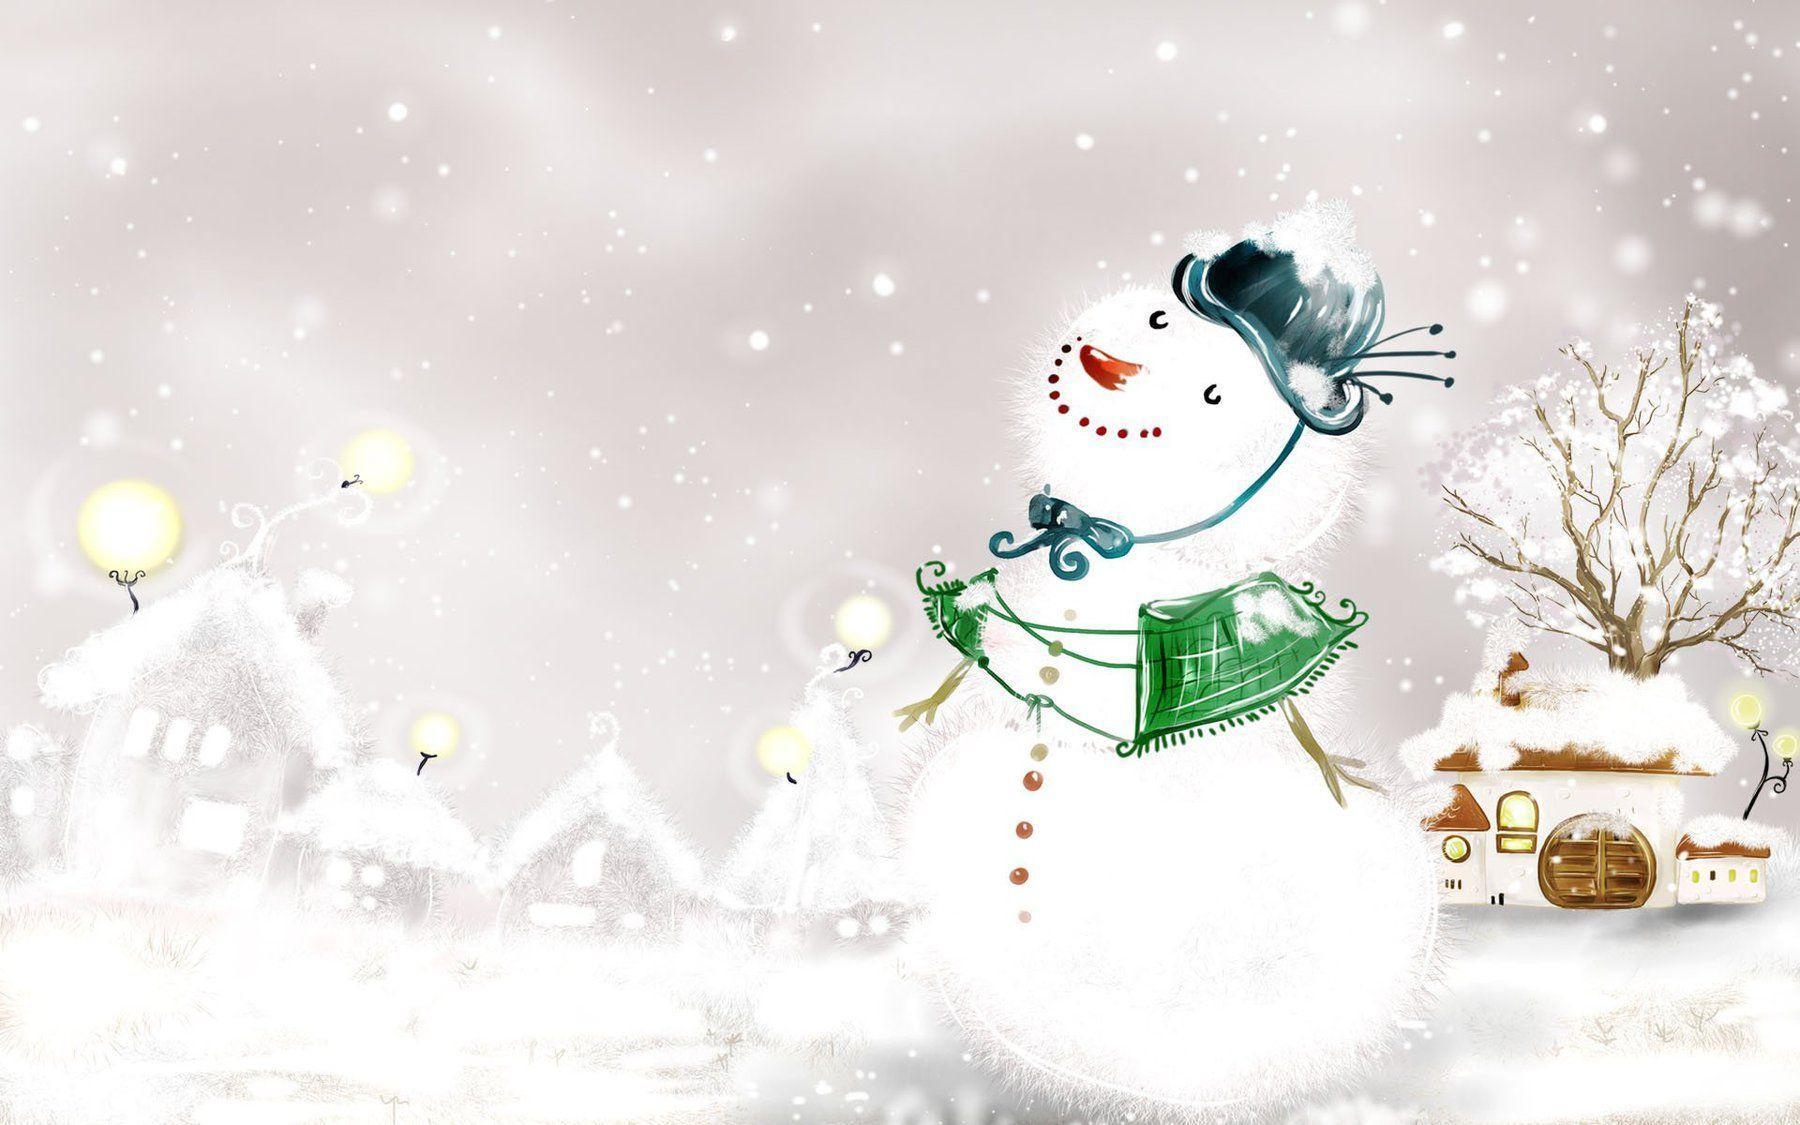 Wallpaper For > Snowman Wallpaper For iPhone